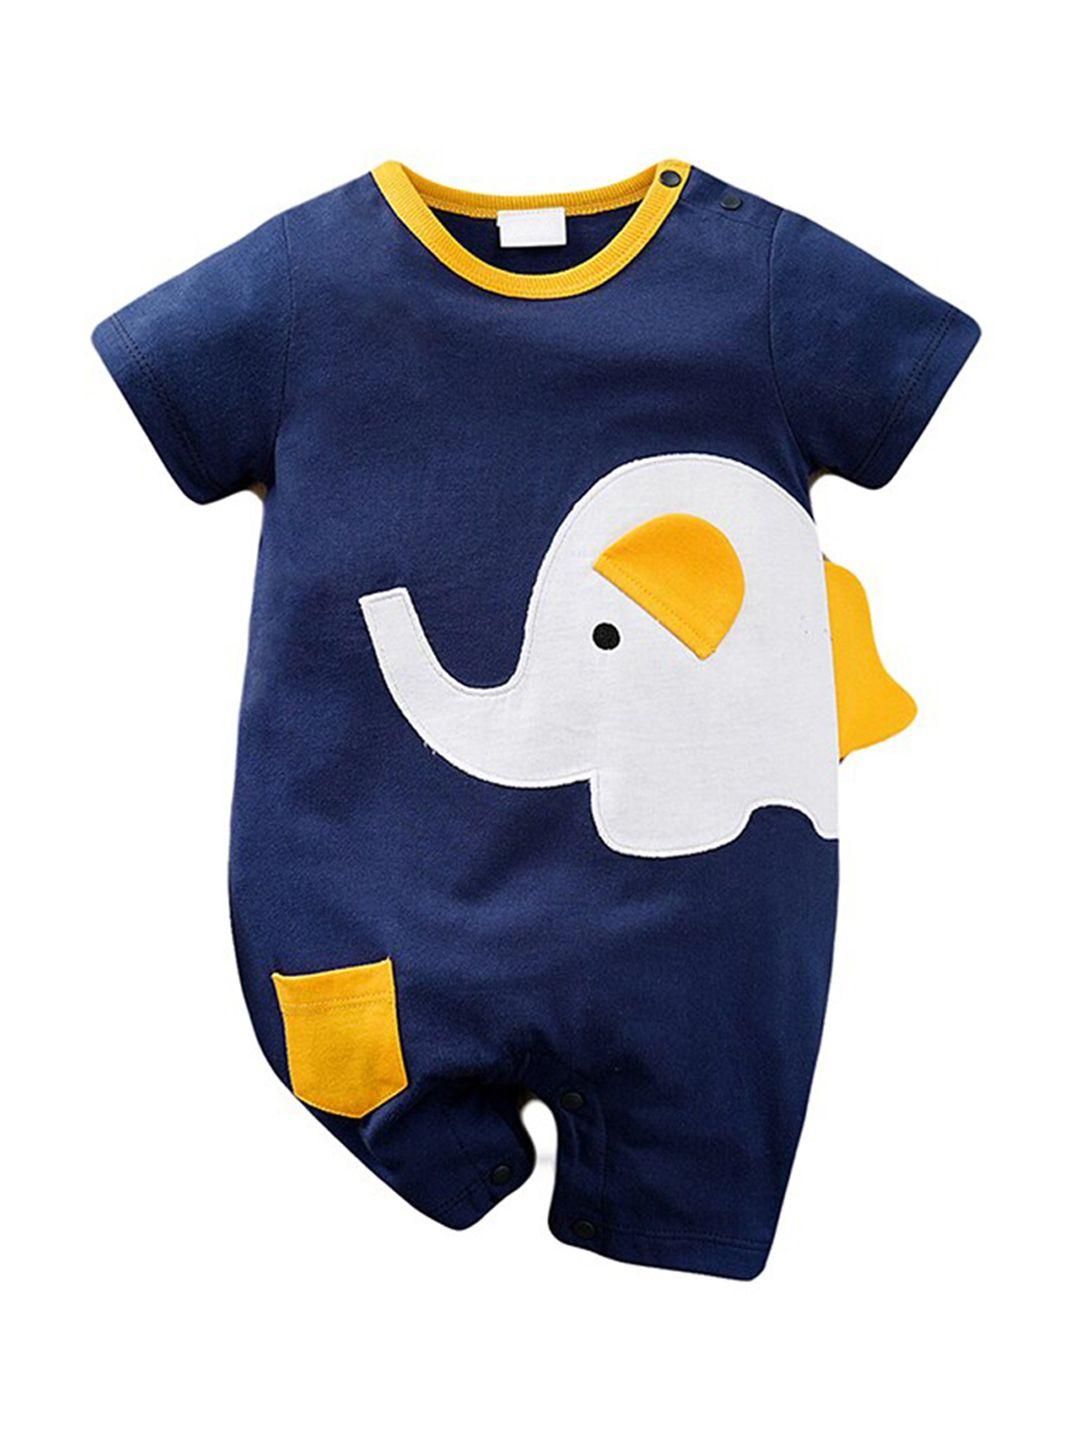 stylecast infants navy blue printed pure cotton romper